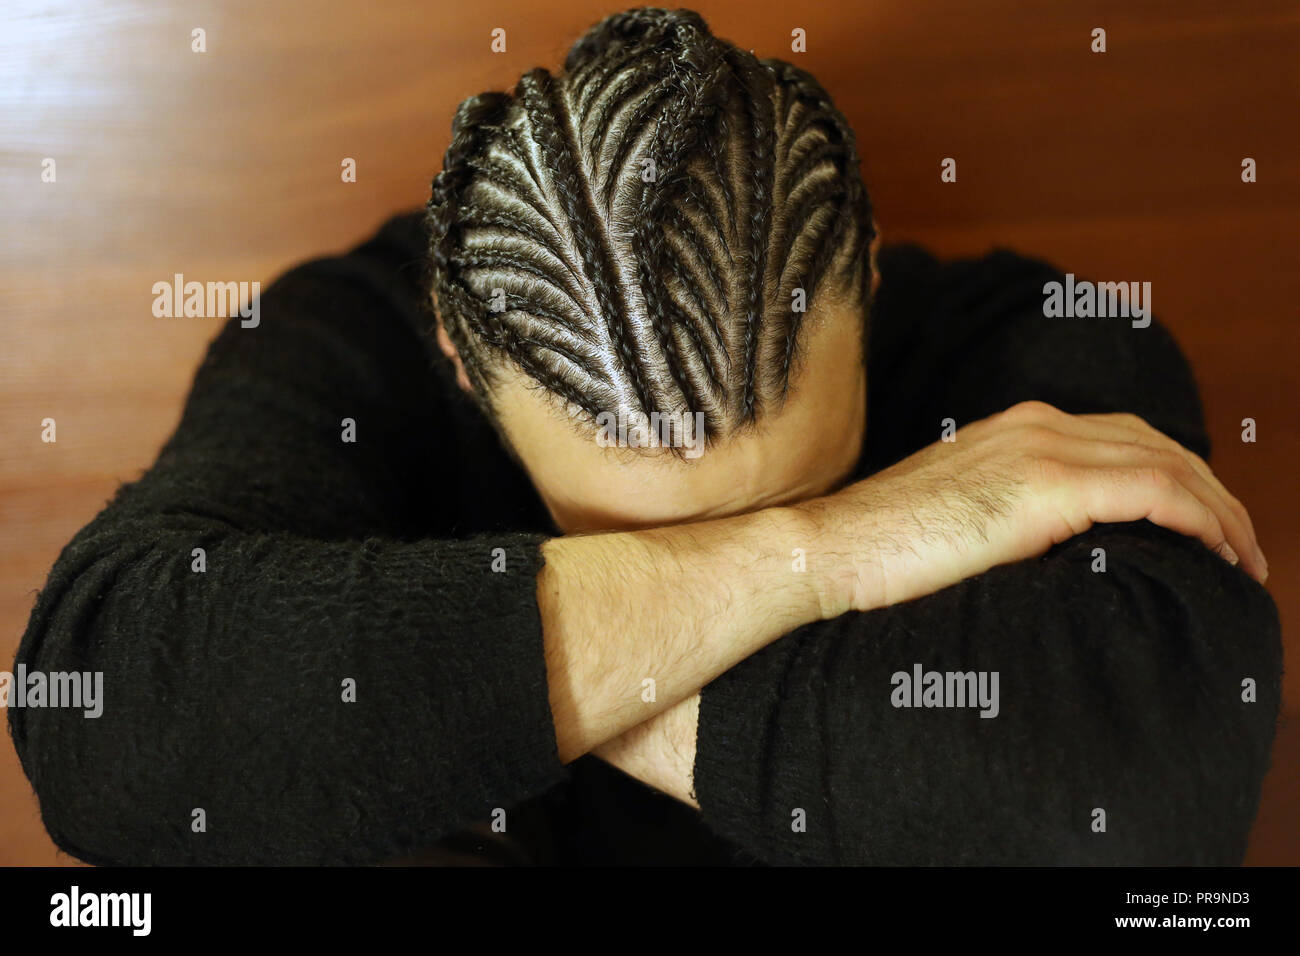 small braids on his head Man with face covered, dark hair, Schot Stock Photo